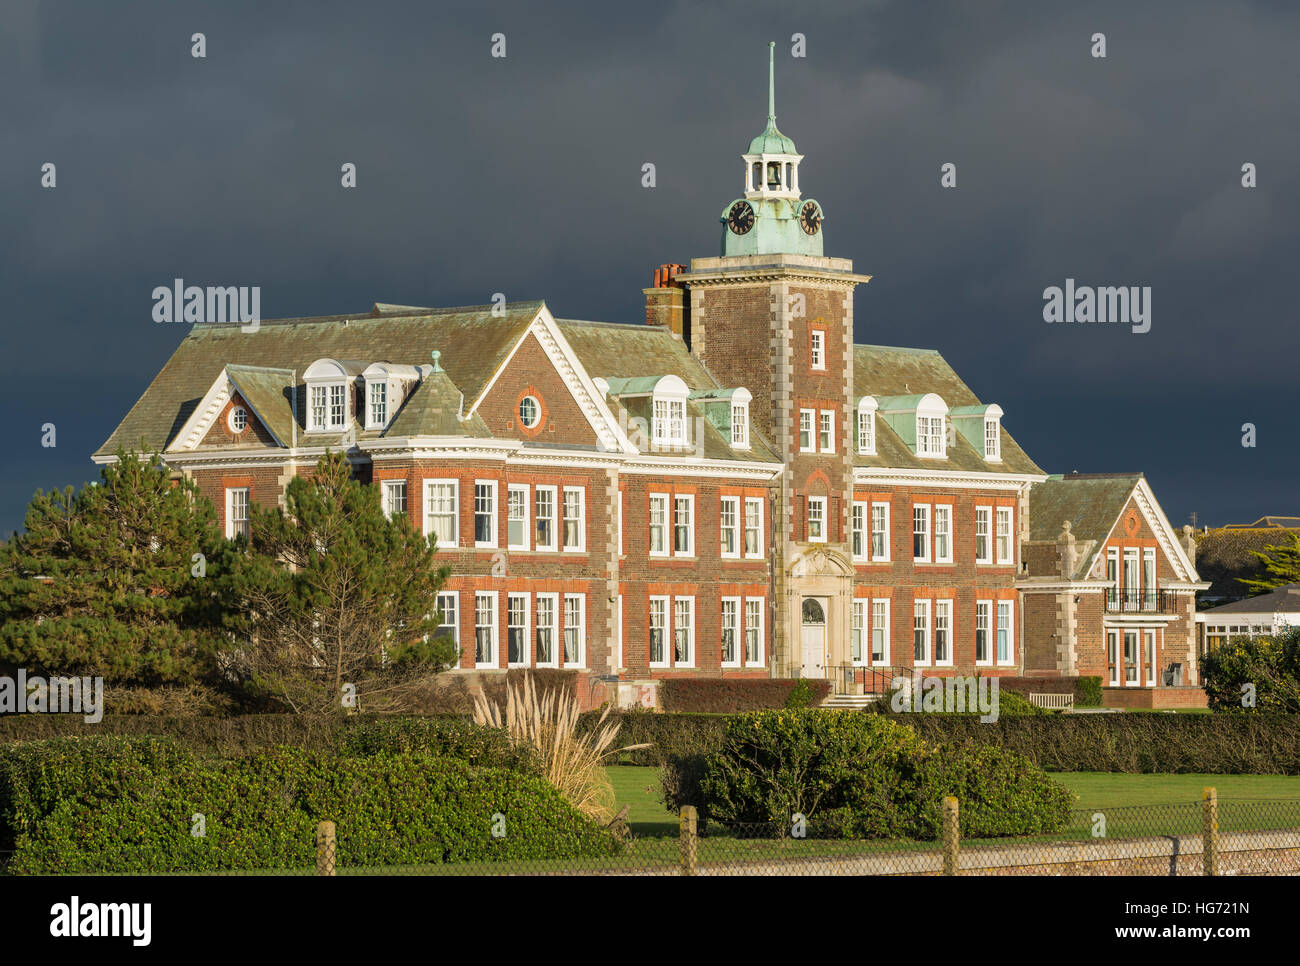 Rustington Convalescent Home, Grade II listed, in Rustington, West Sussex, England, UK, built in 1897 in Neo-Caroline style. Nursing home. Care home. Stock Photo